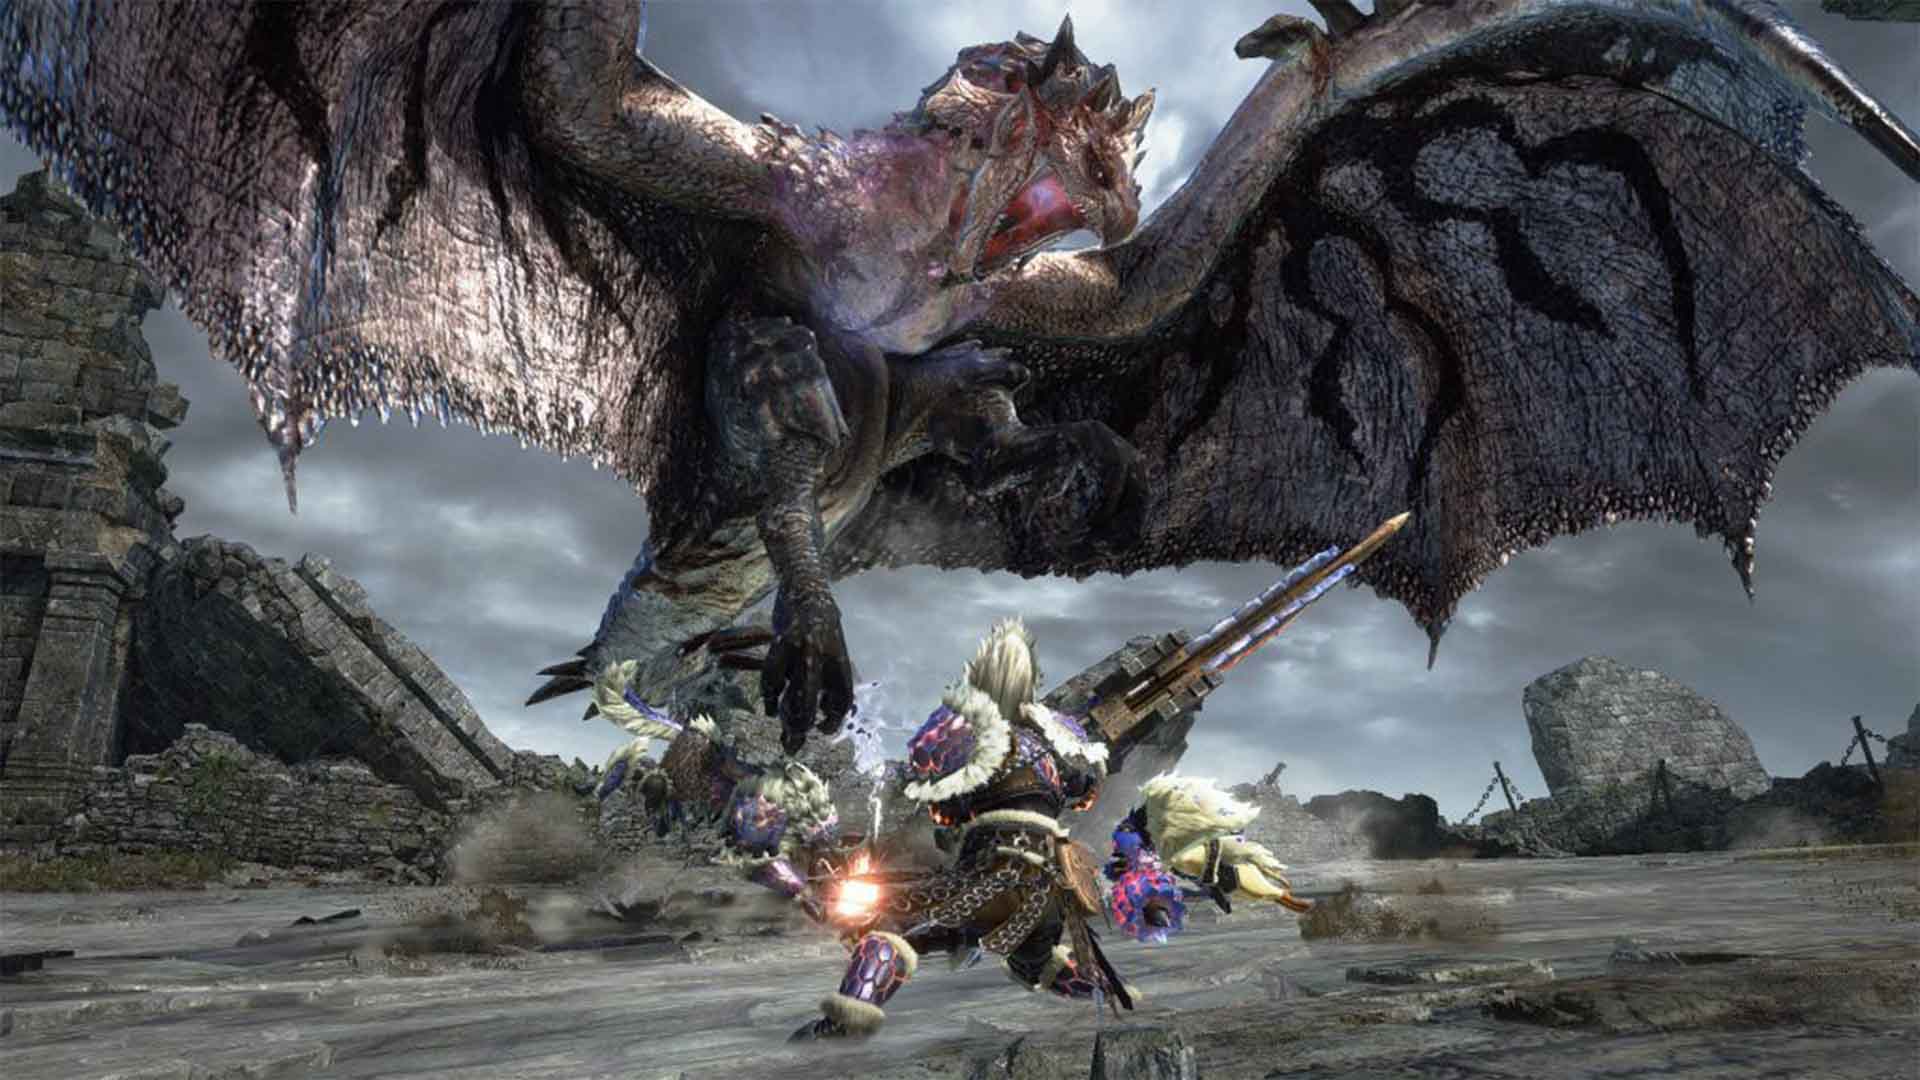 A new Monster Hunter game is coming from Tencent's Timi Studio Group